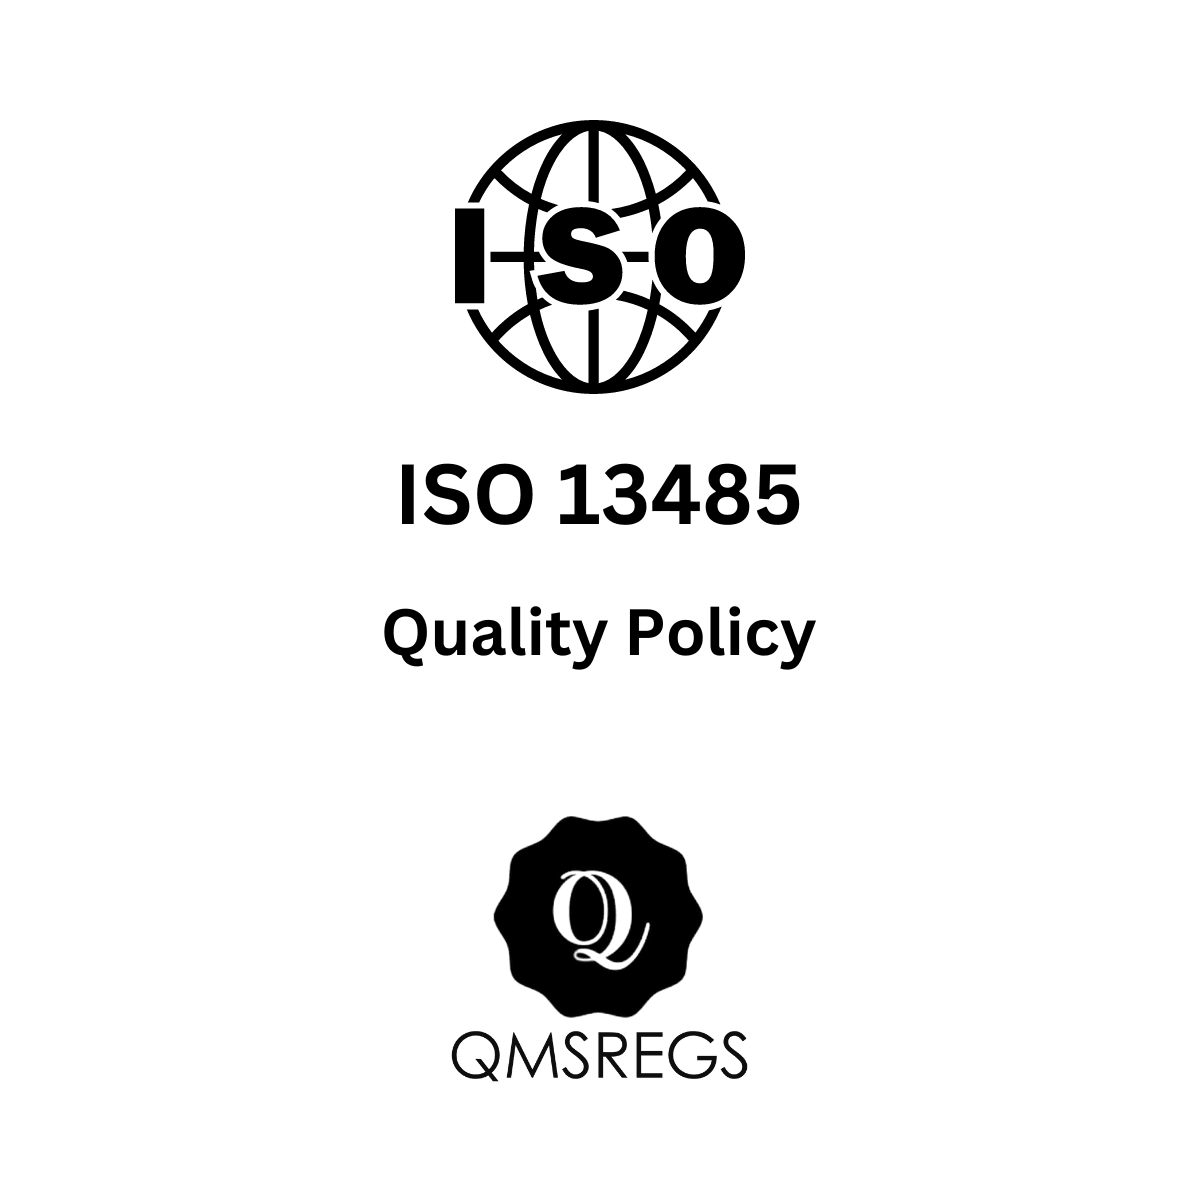 ISO 13485 Quality Policy Template